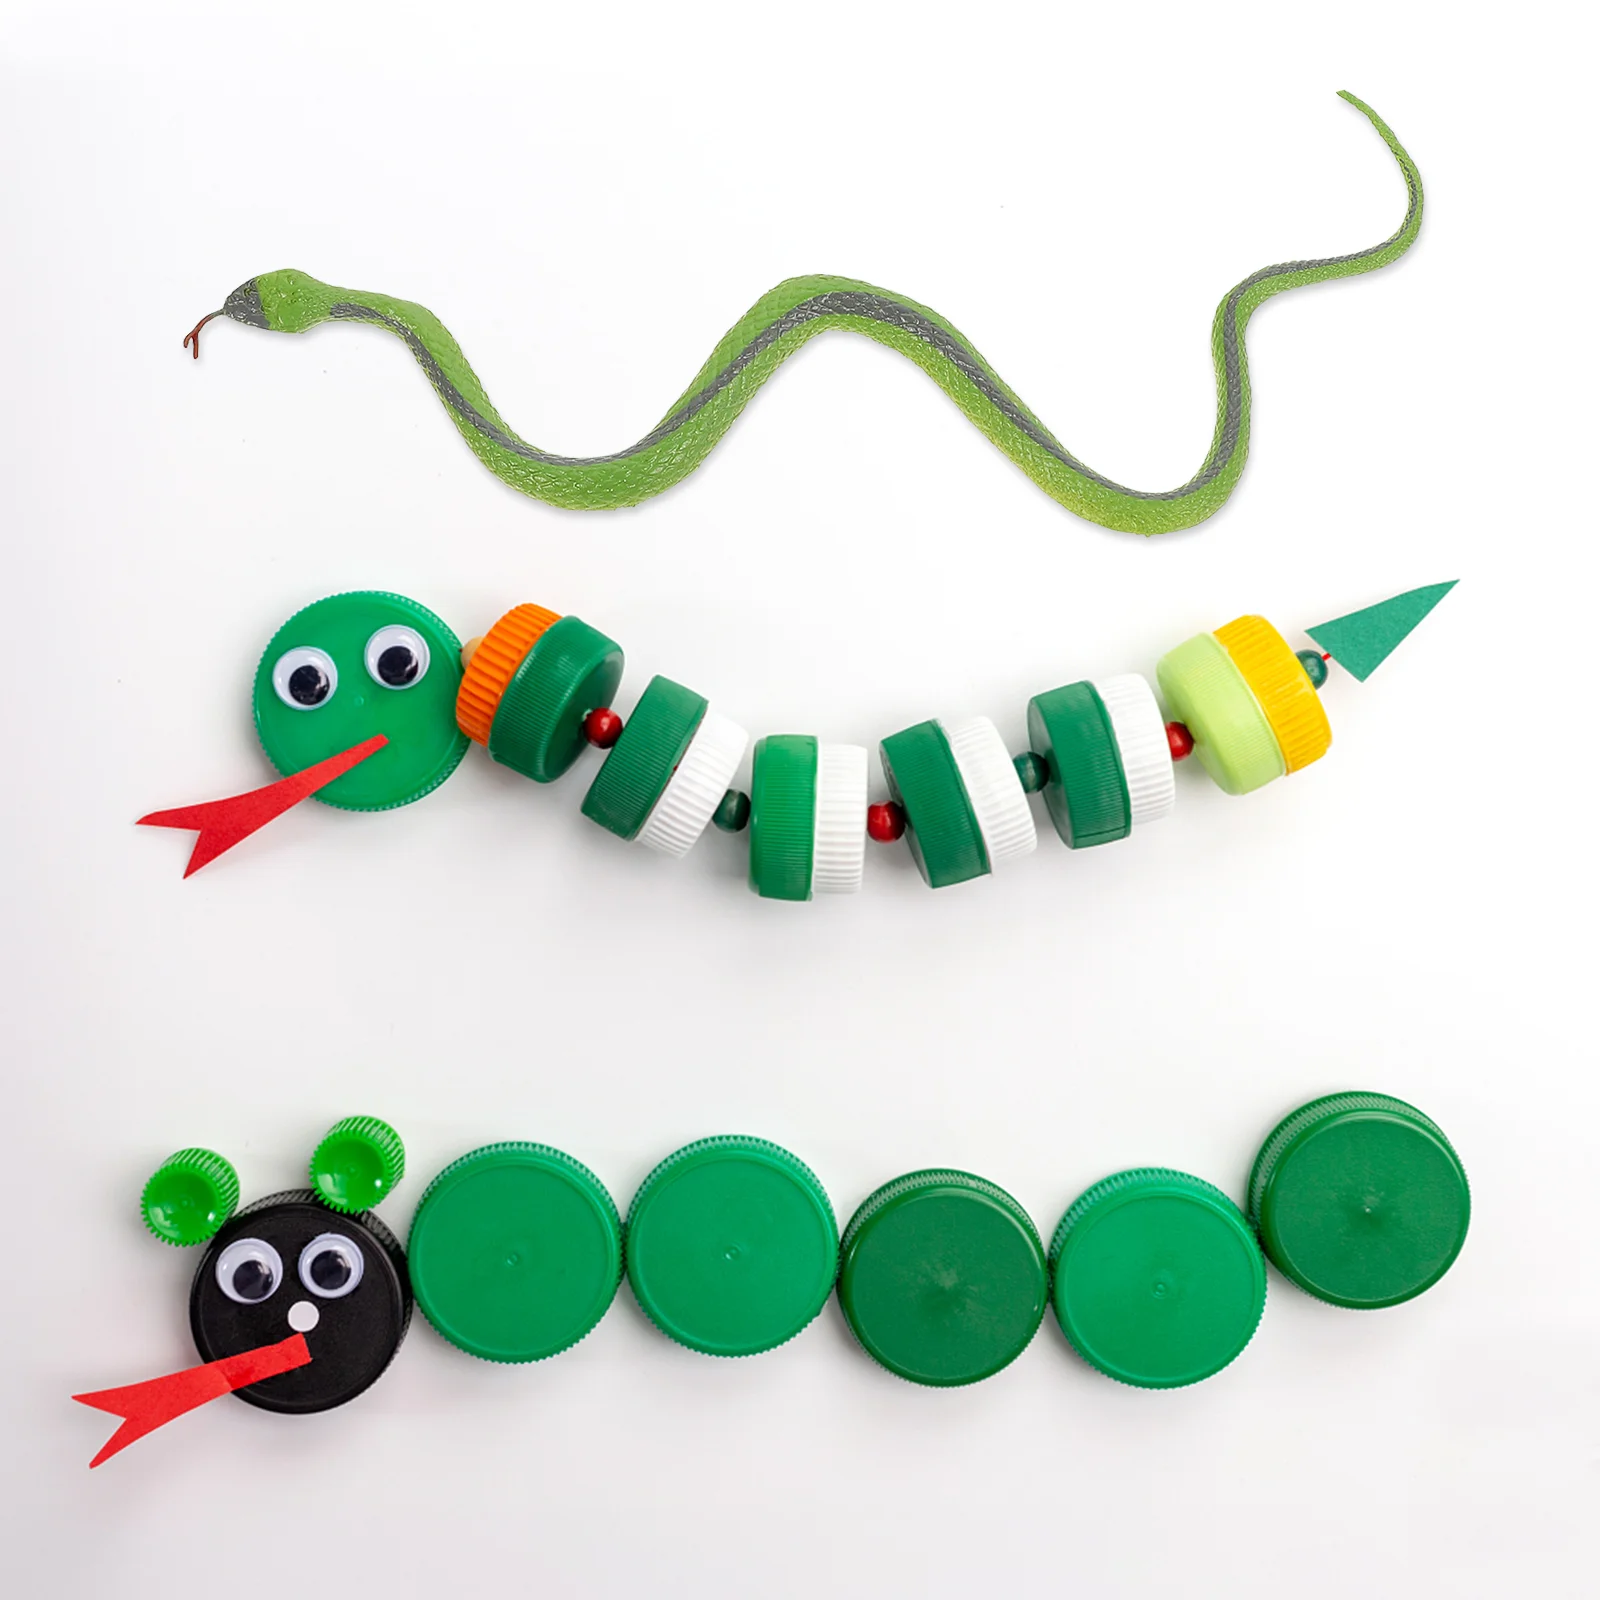 Rubber Snake Toy Portable Toys Children Simulated Snakes Party Prank Models Fake Props